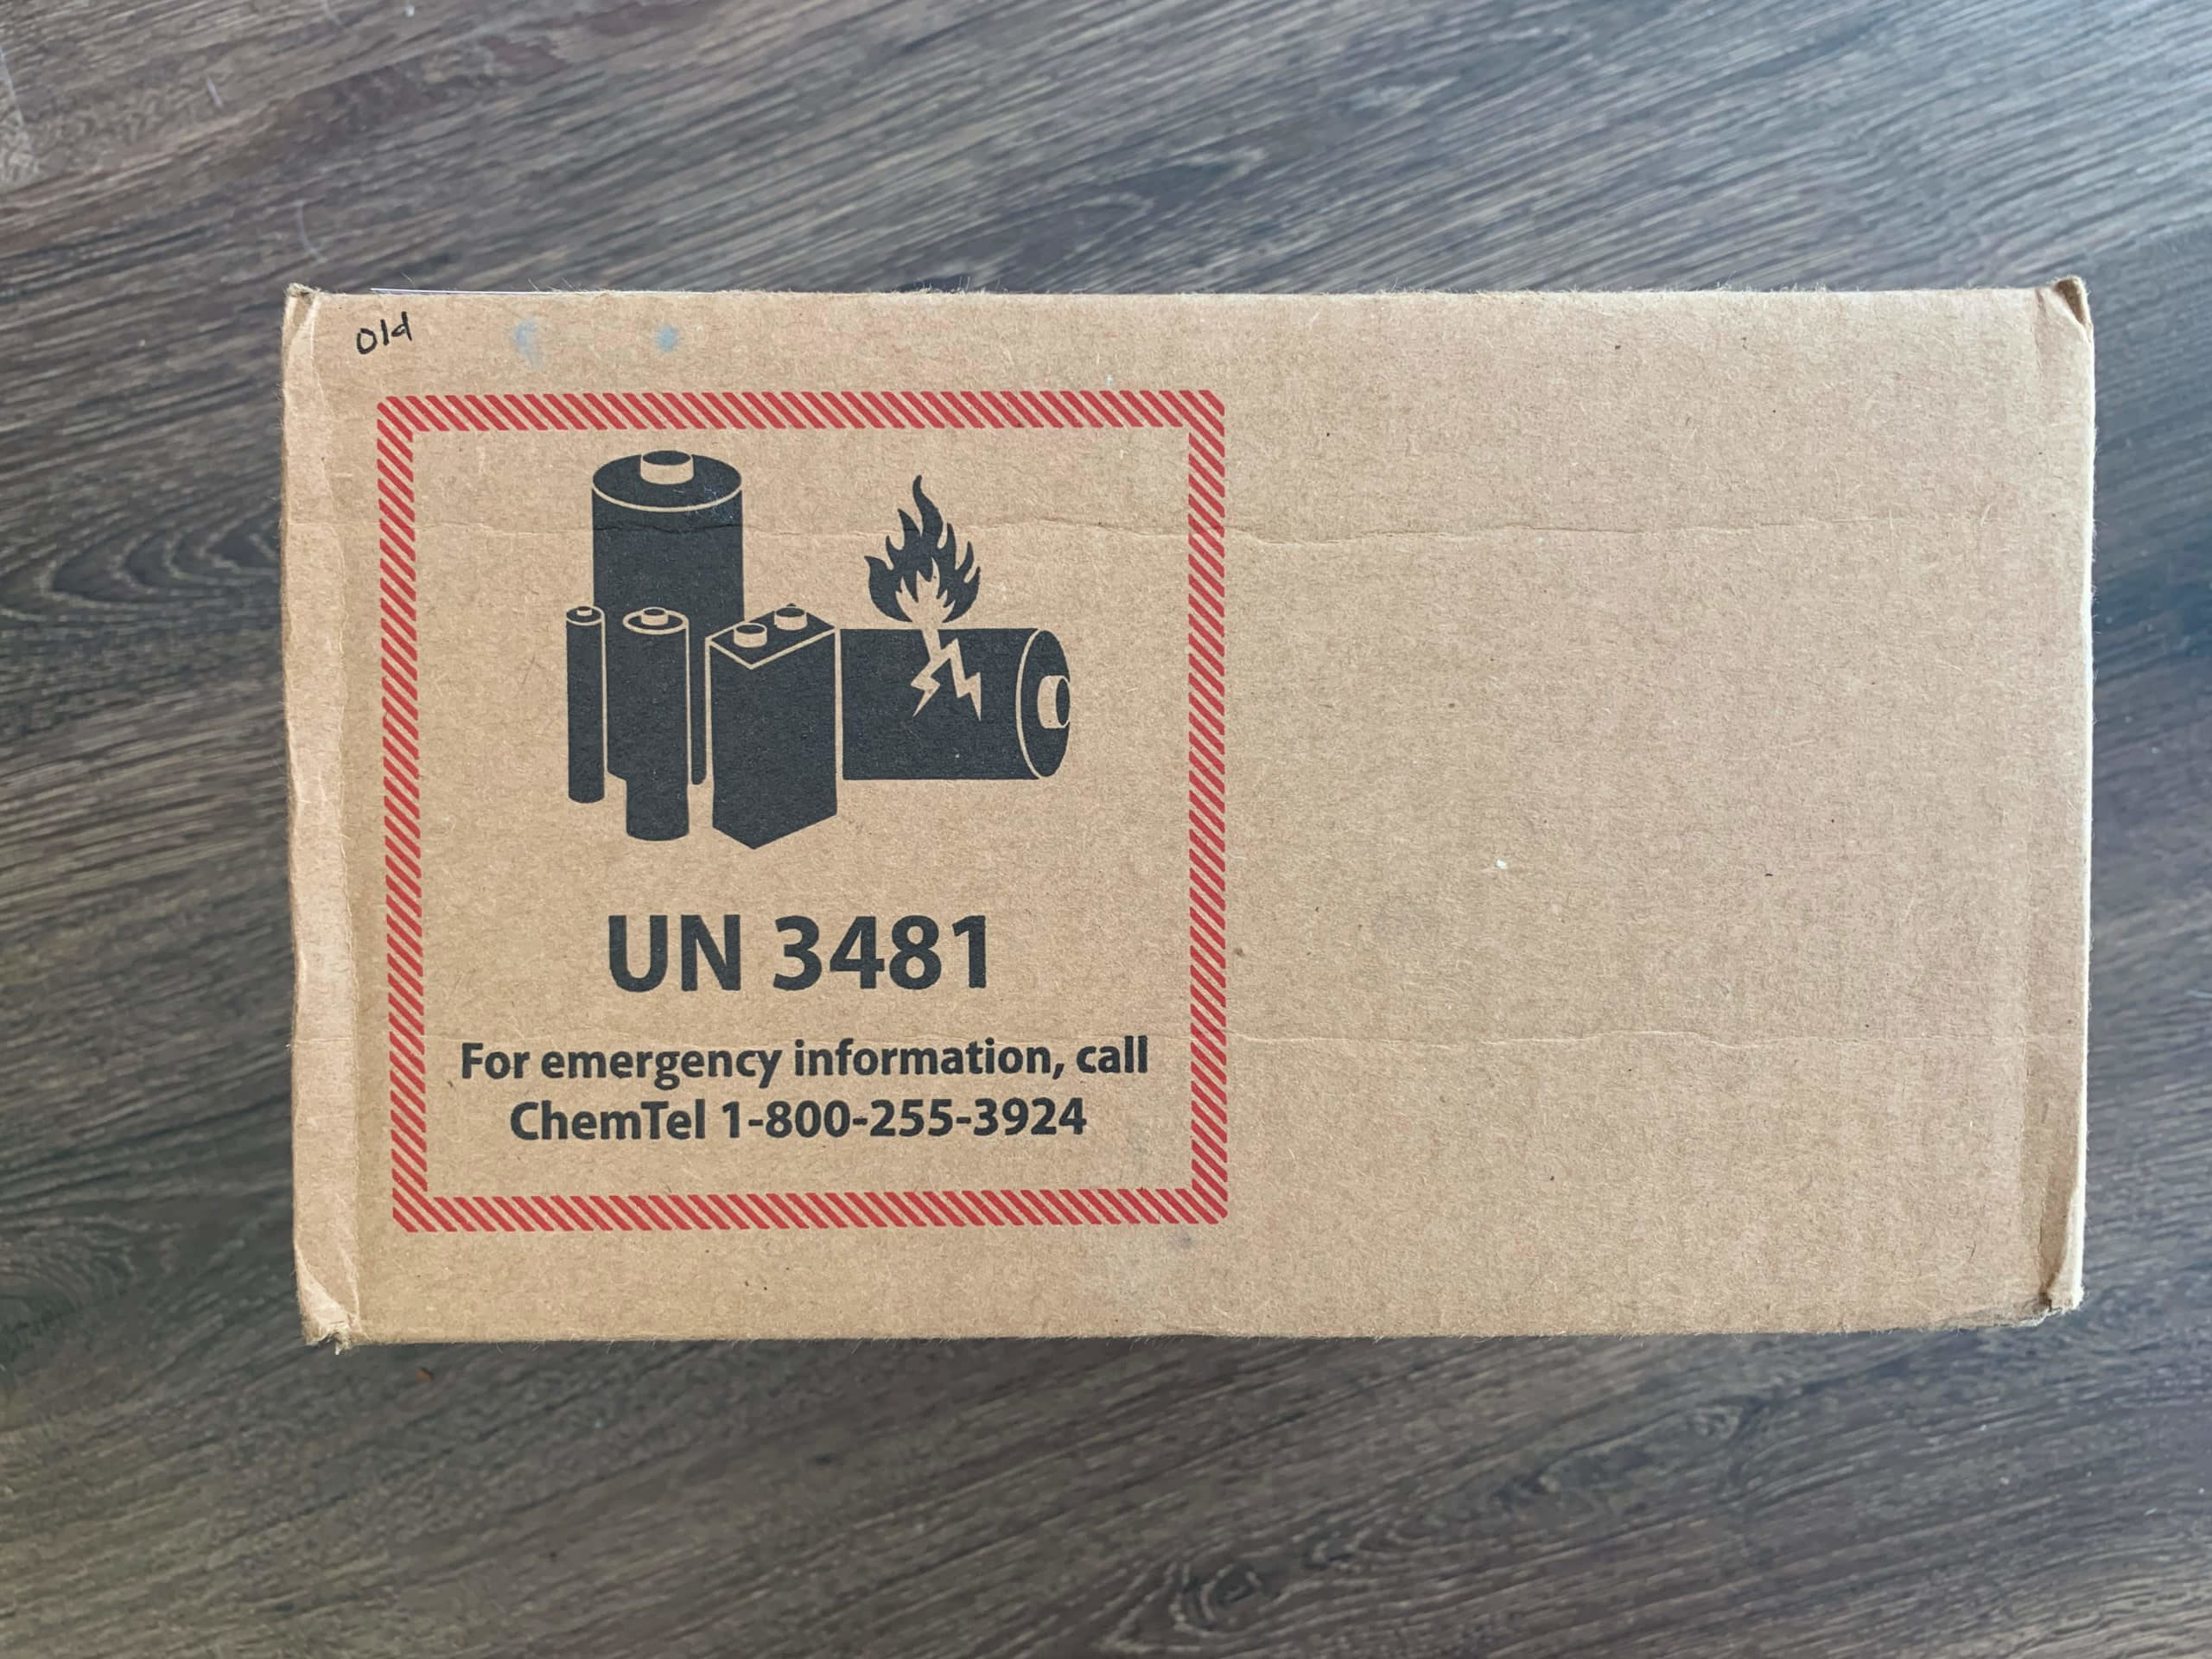 UN 3481 Label for shipping lithium ion cell phone batteries